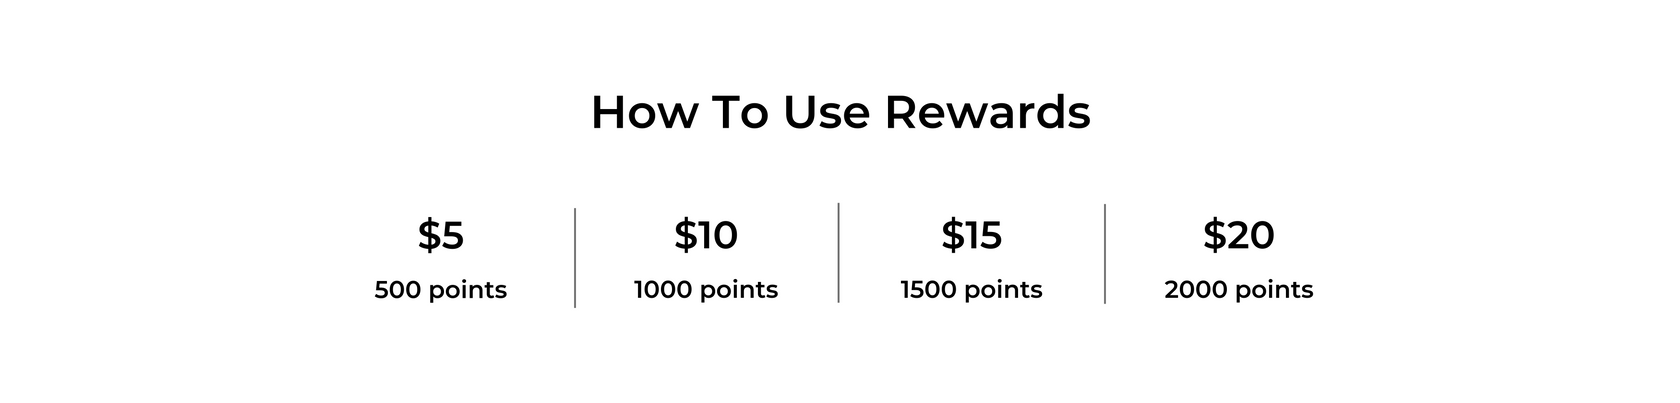 how to use rewards: 500 points equals $5, 1000 points equals $10, 1500 points equals $15, 2000 points equals $20